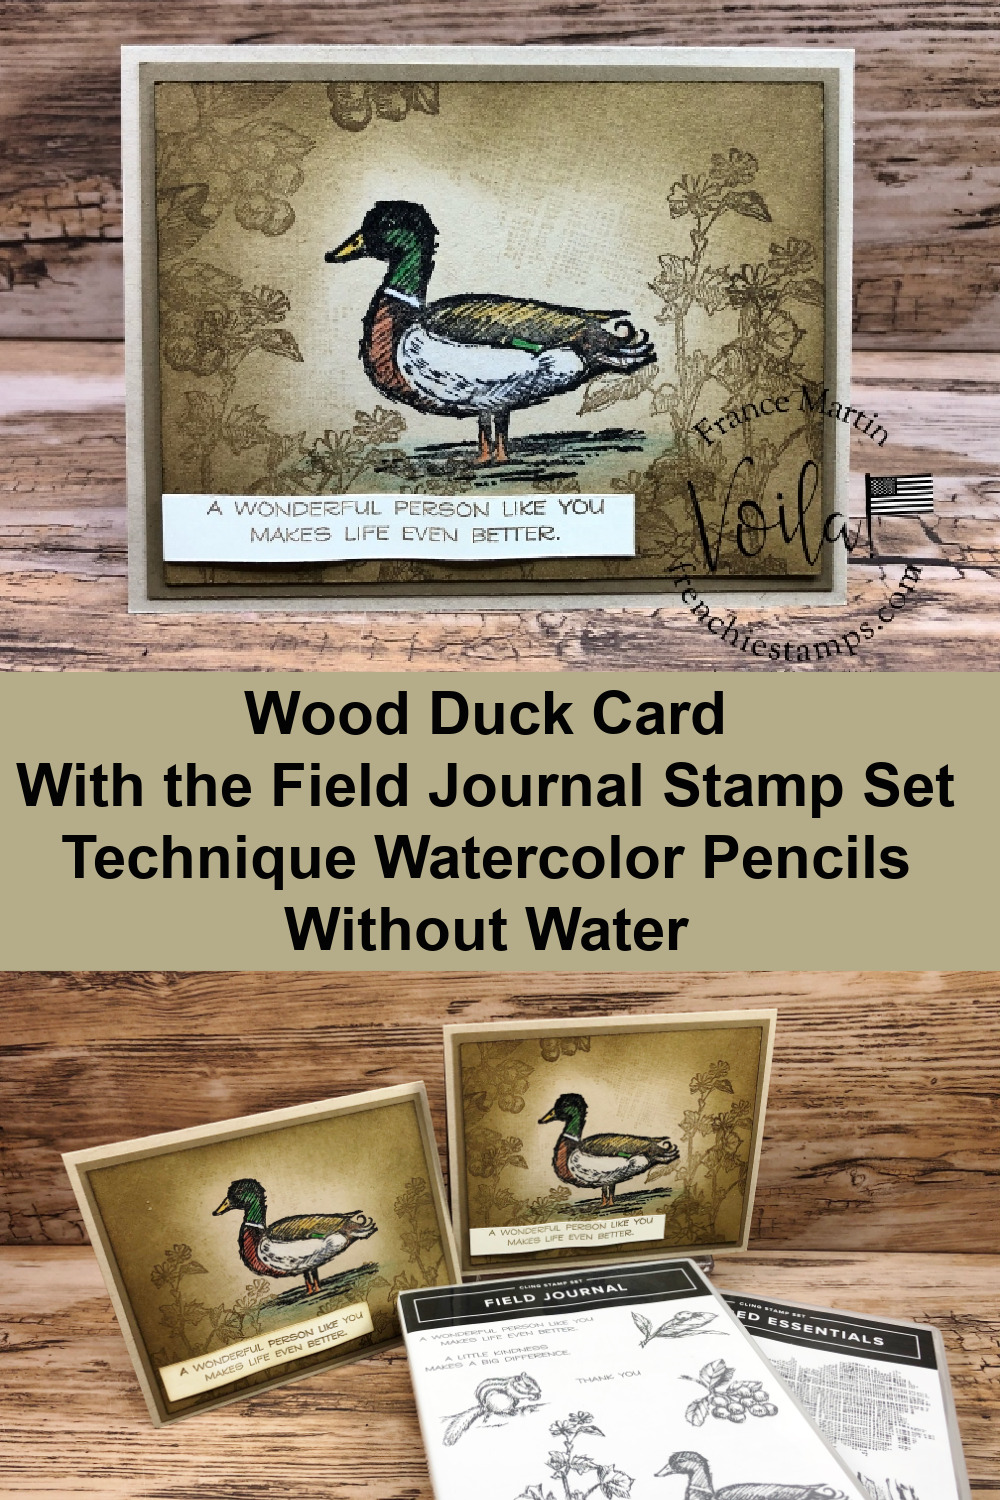 Wood Duck Card with the Field Journal stamp set and watercolor pencils without water